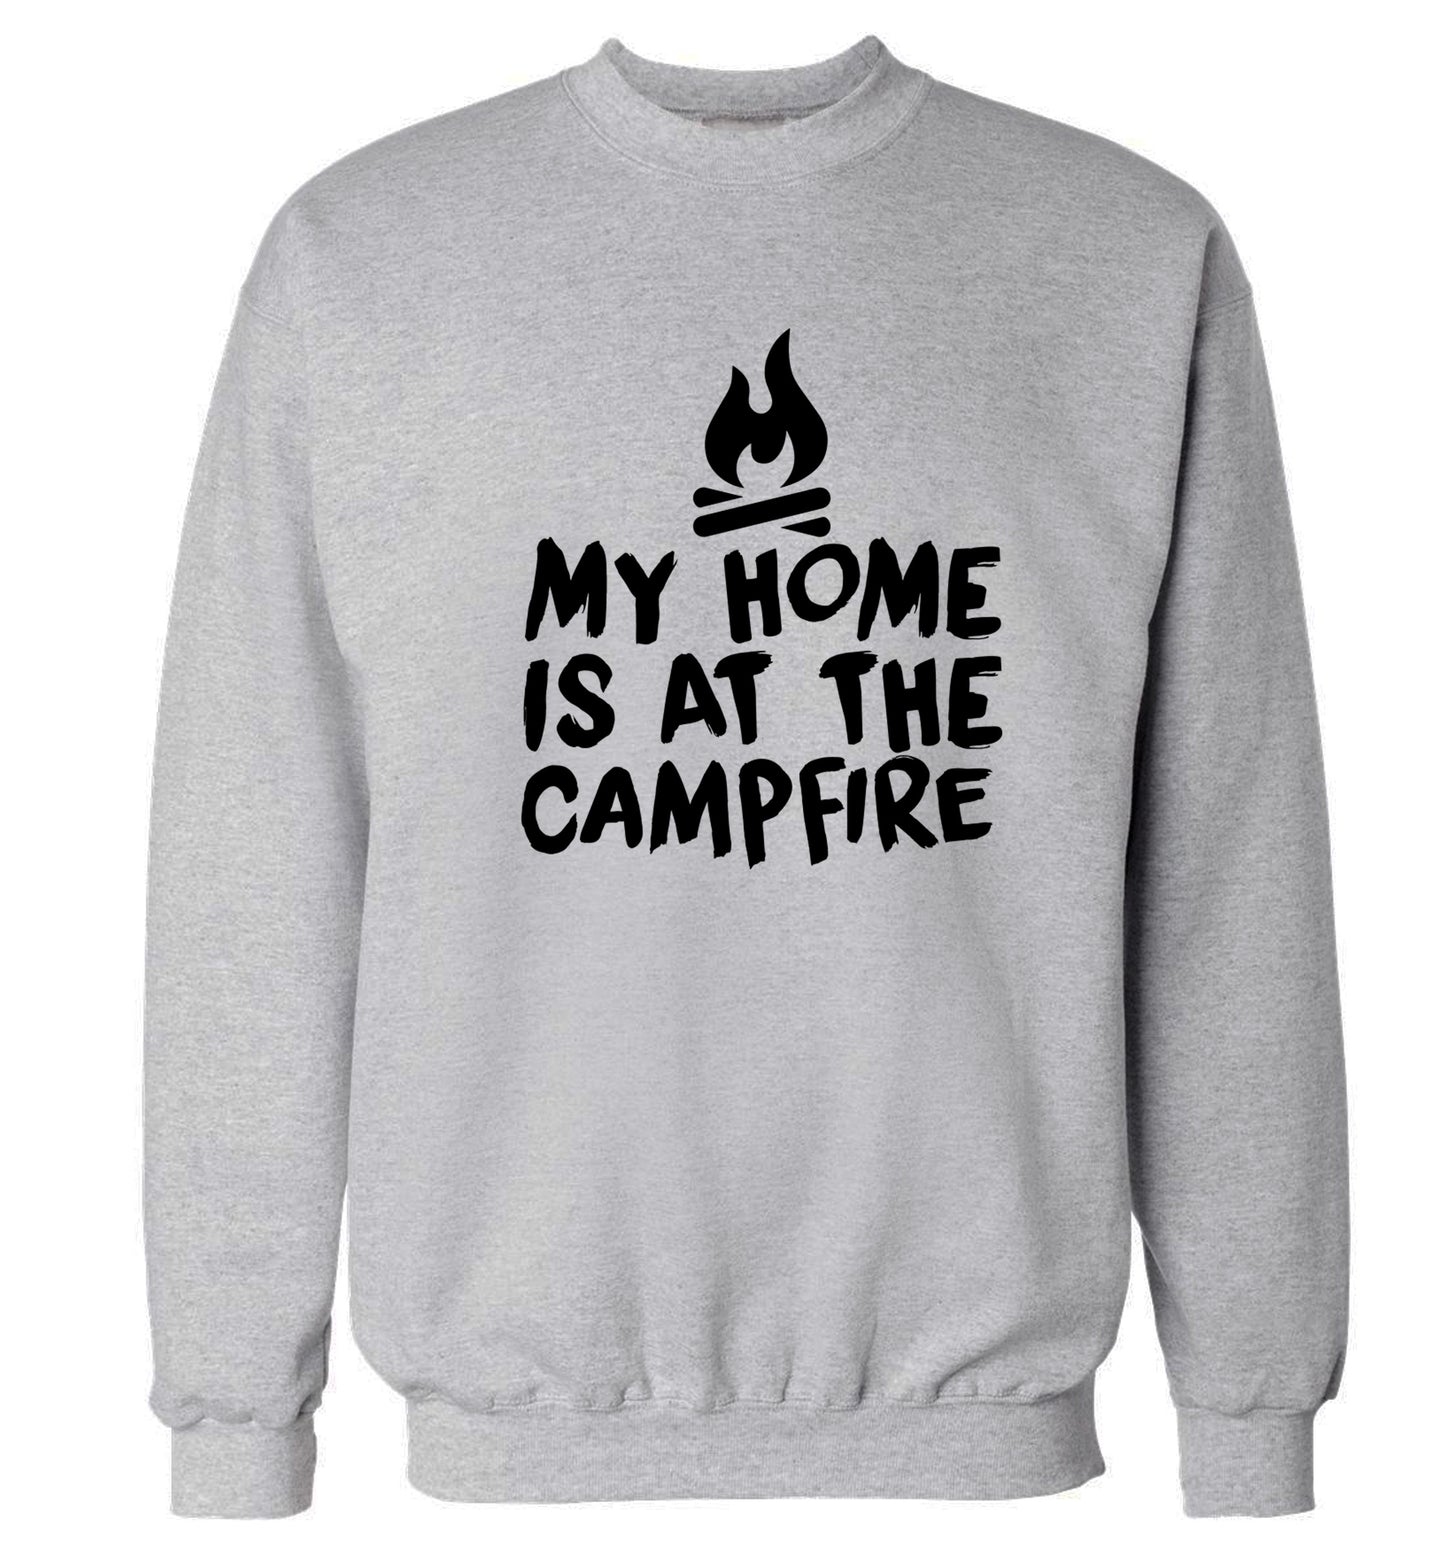 My home is at the campfire Adult's unisex grey Sweater 2XL